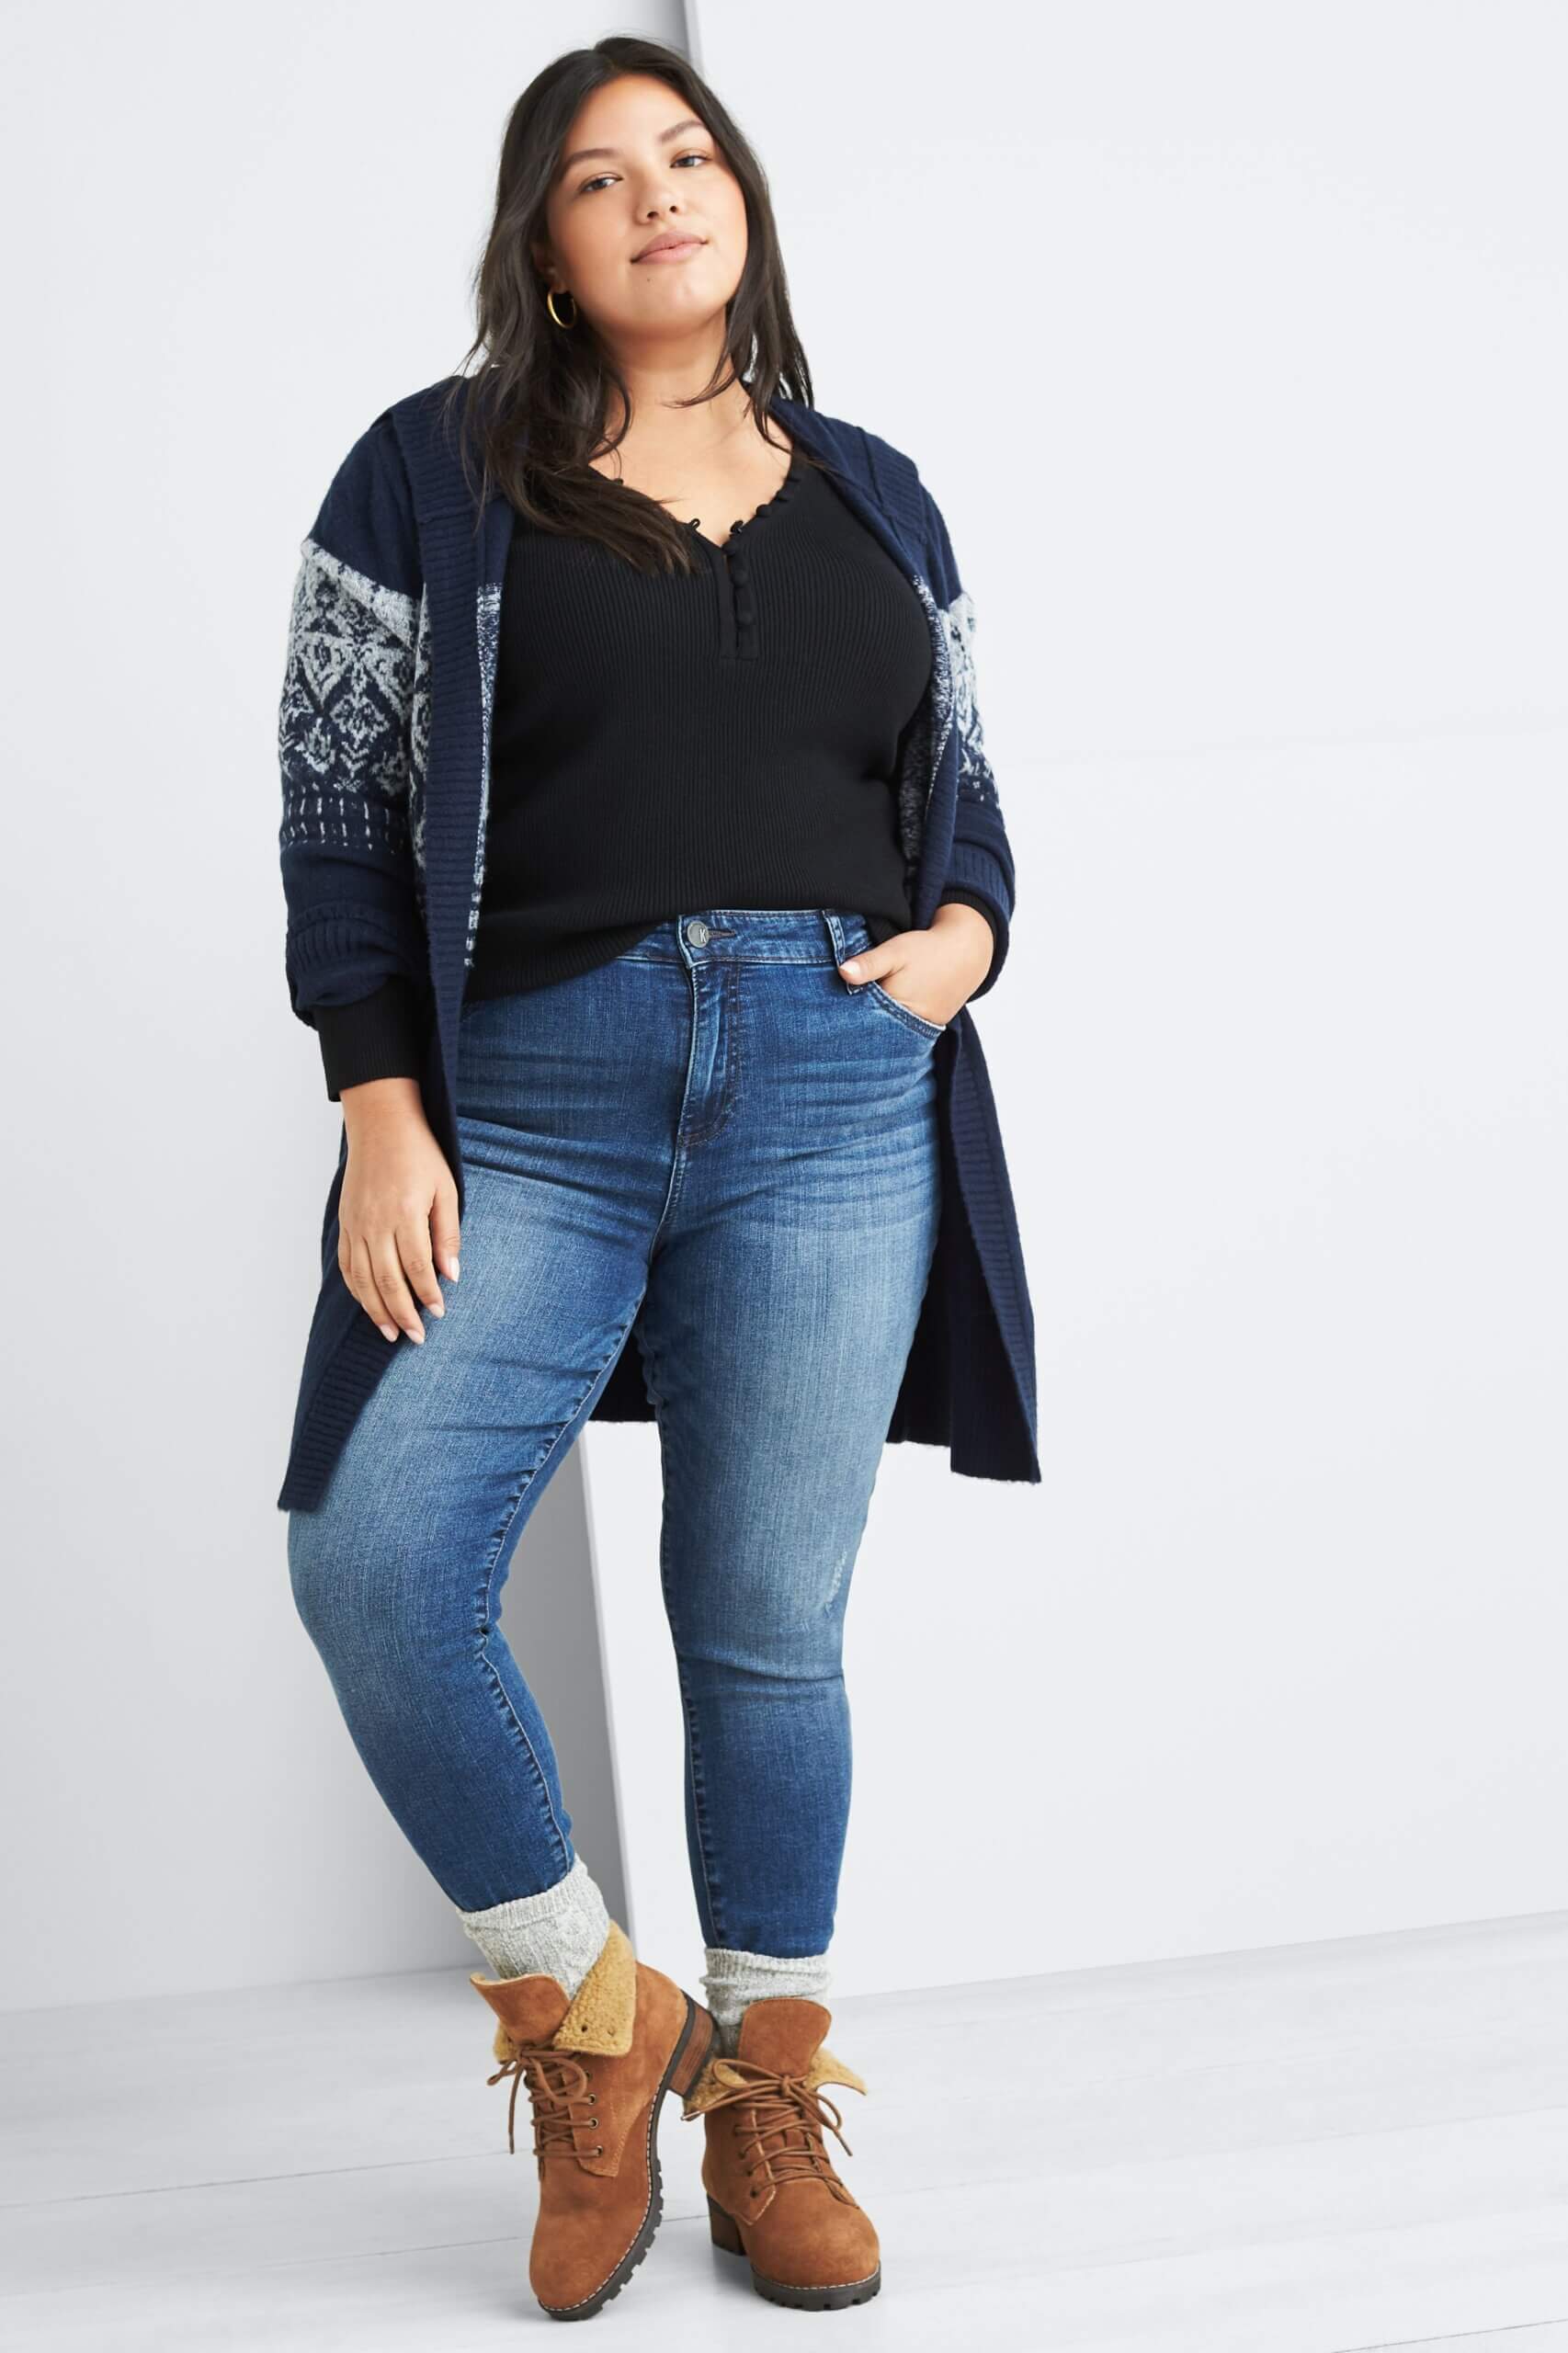 Stitch Fix Women's model wearing navy pullover, navy fair isle hooded cardigan, grey socks over her blue jeans and brown combat booties. 